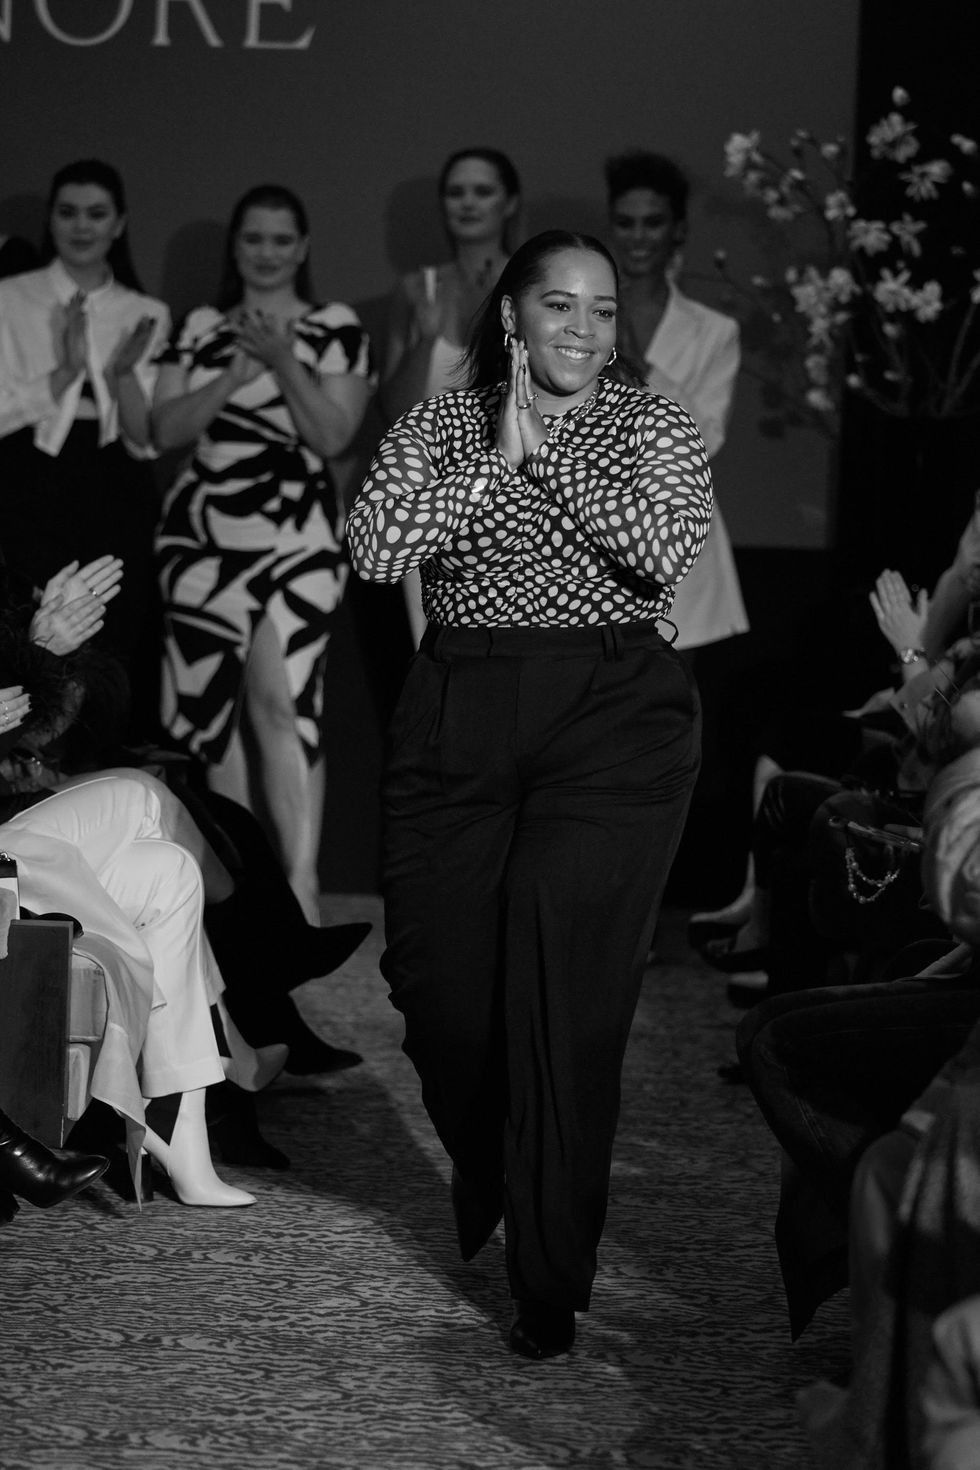 Torrid aims to be the future of plus-size fashion with first NYFW show